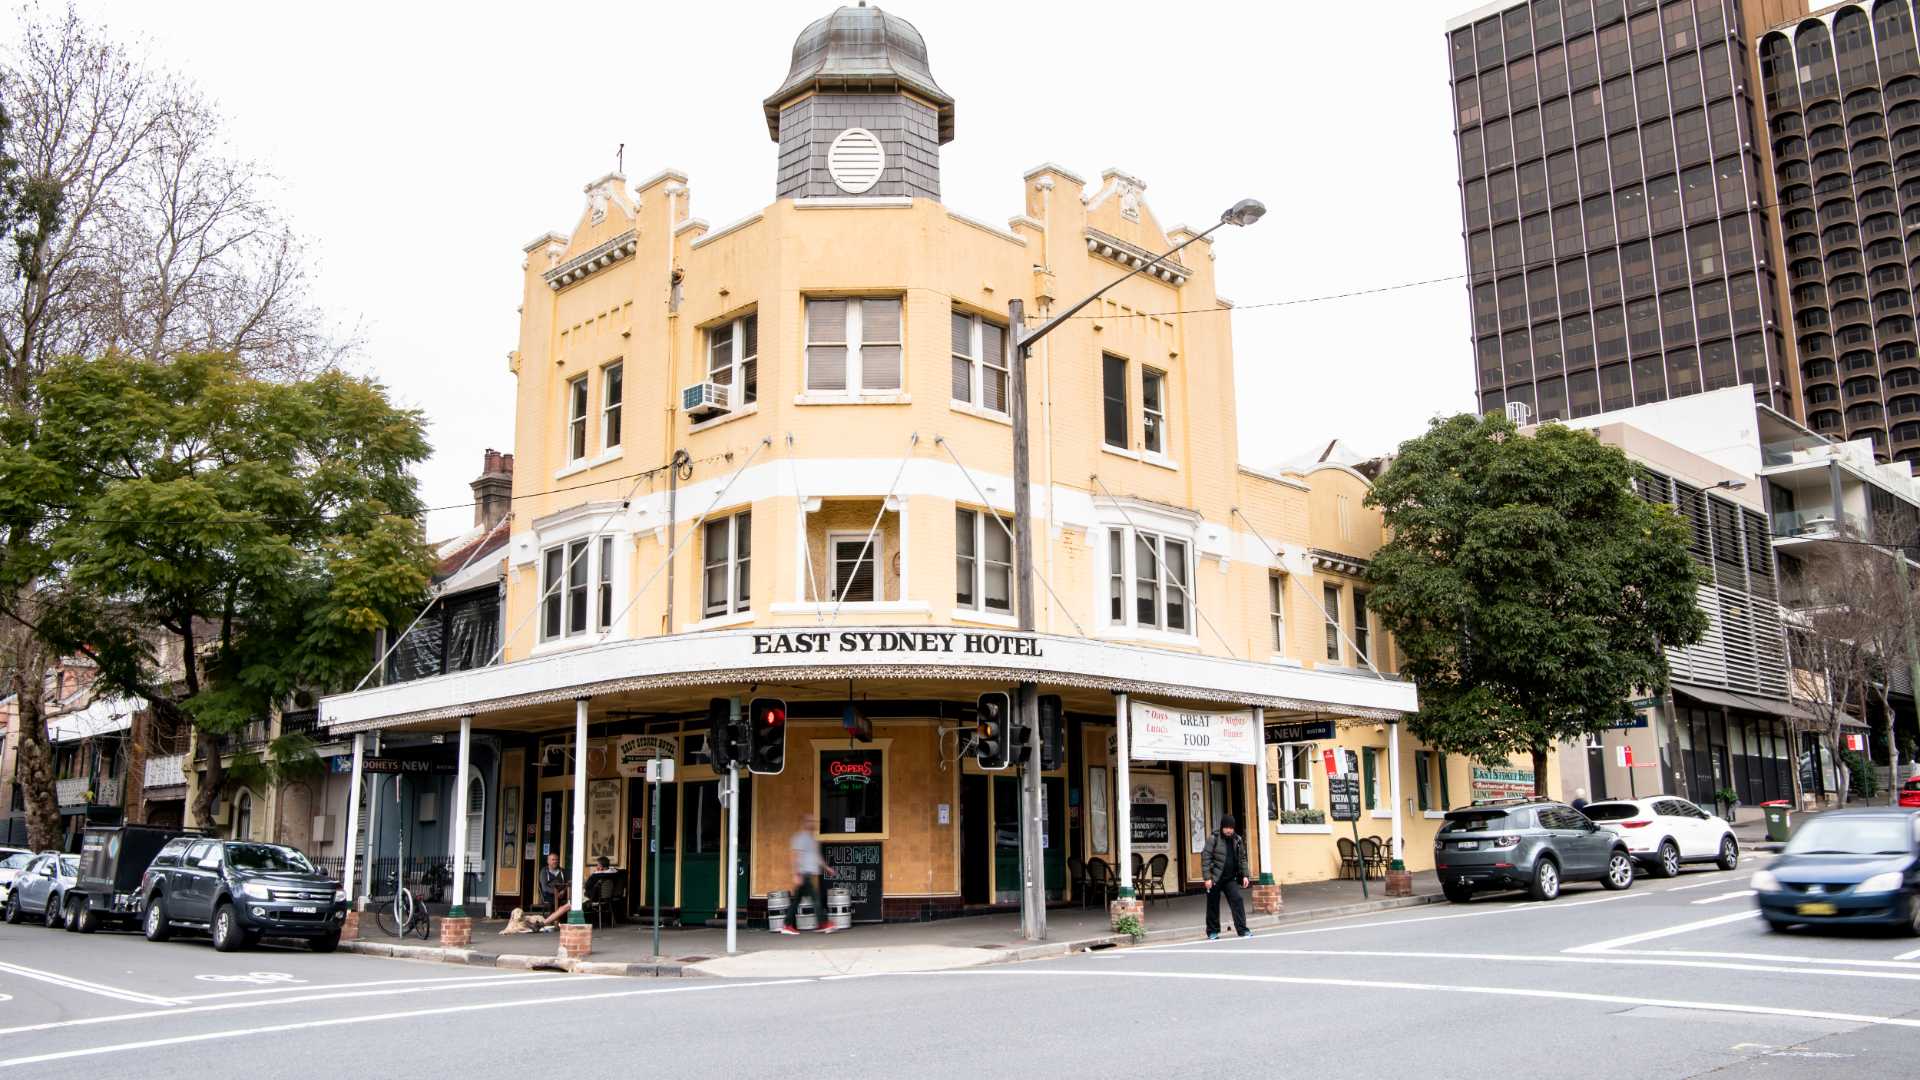 The East Sydney Hotel